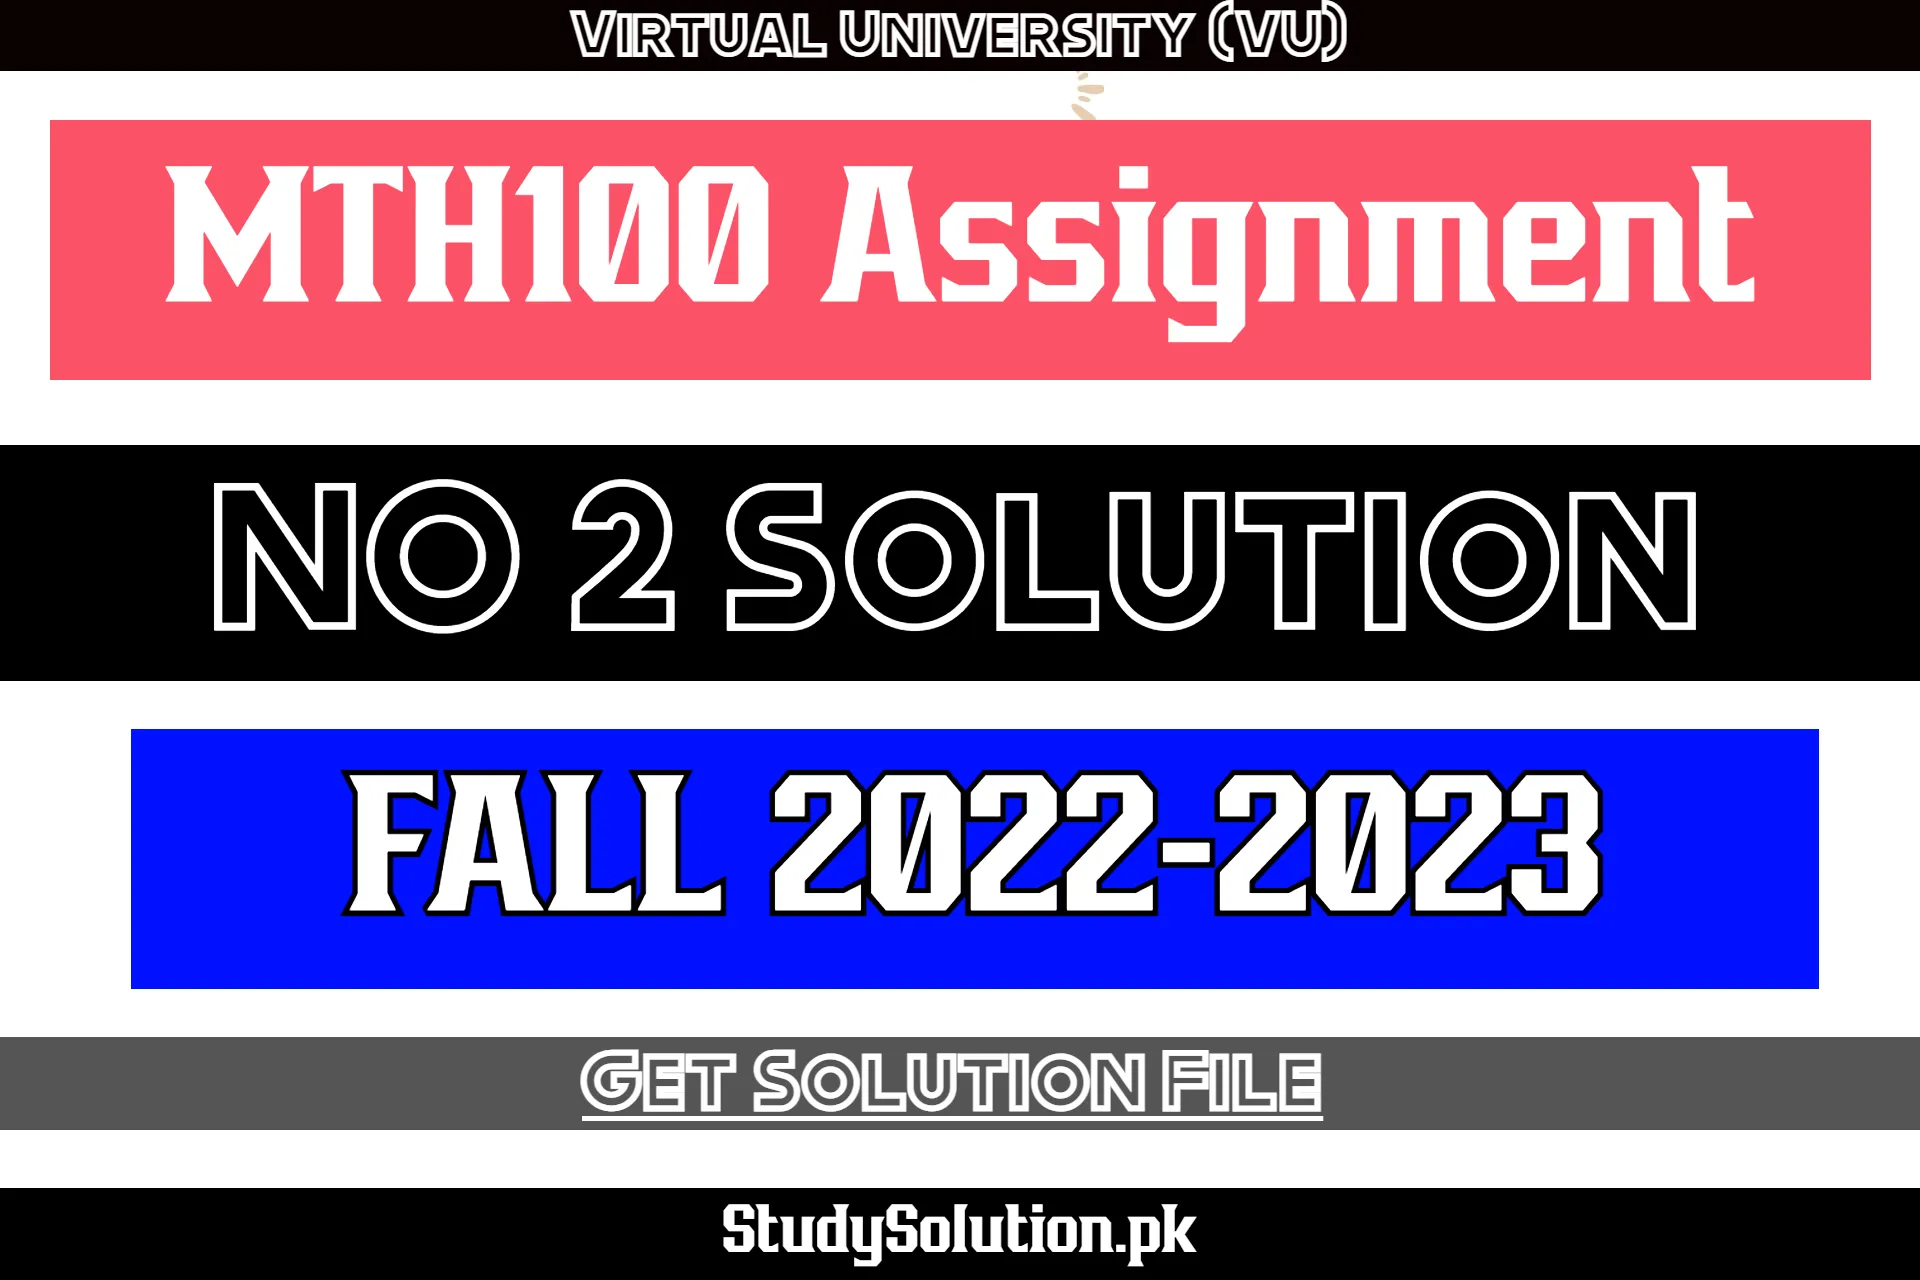 MTH100 Assignment No 2 Solution Fall 2022